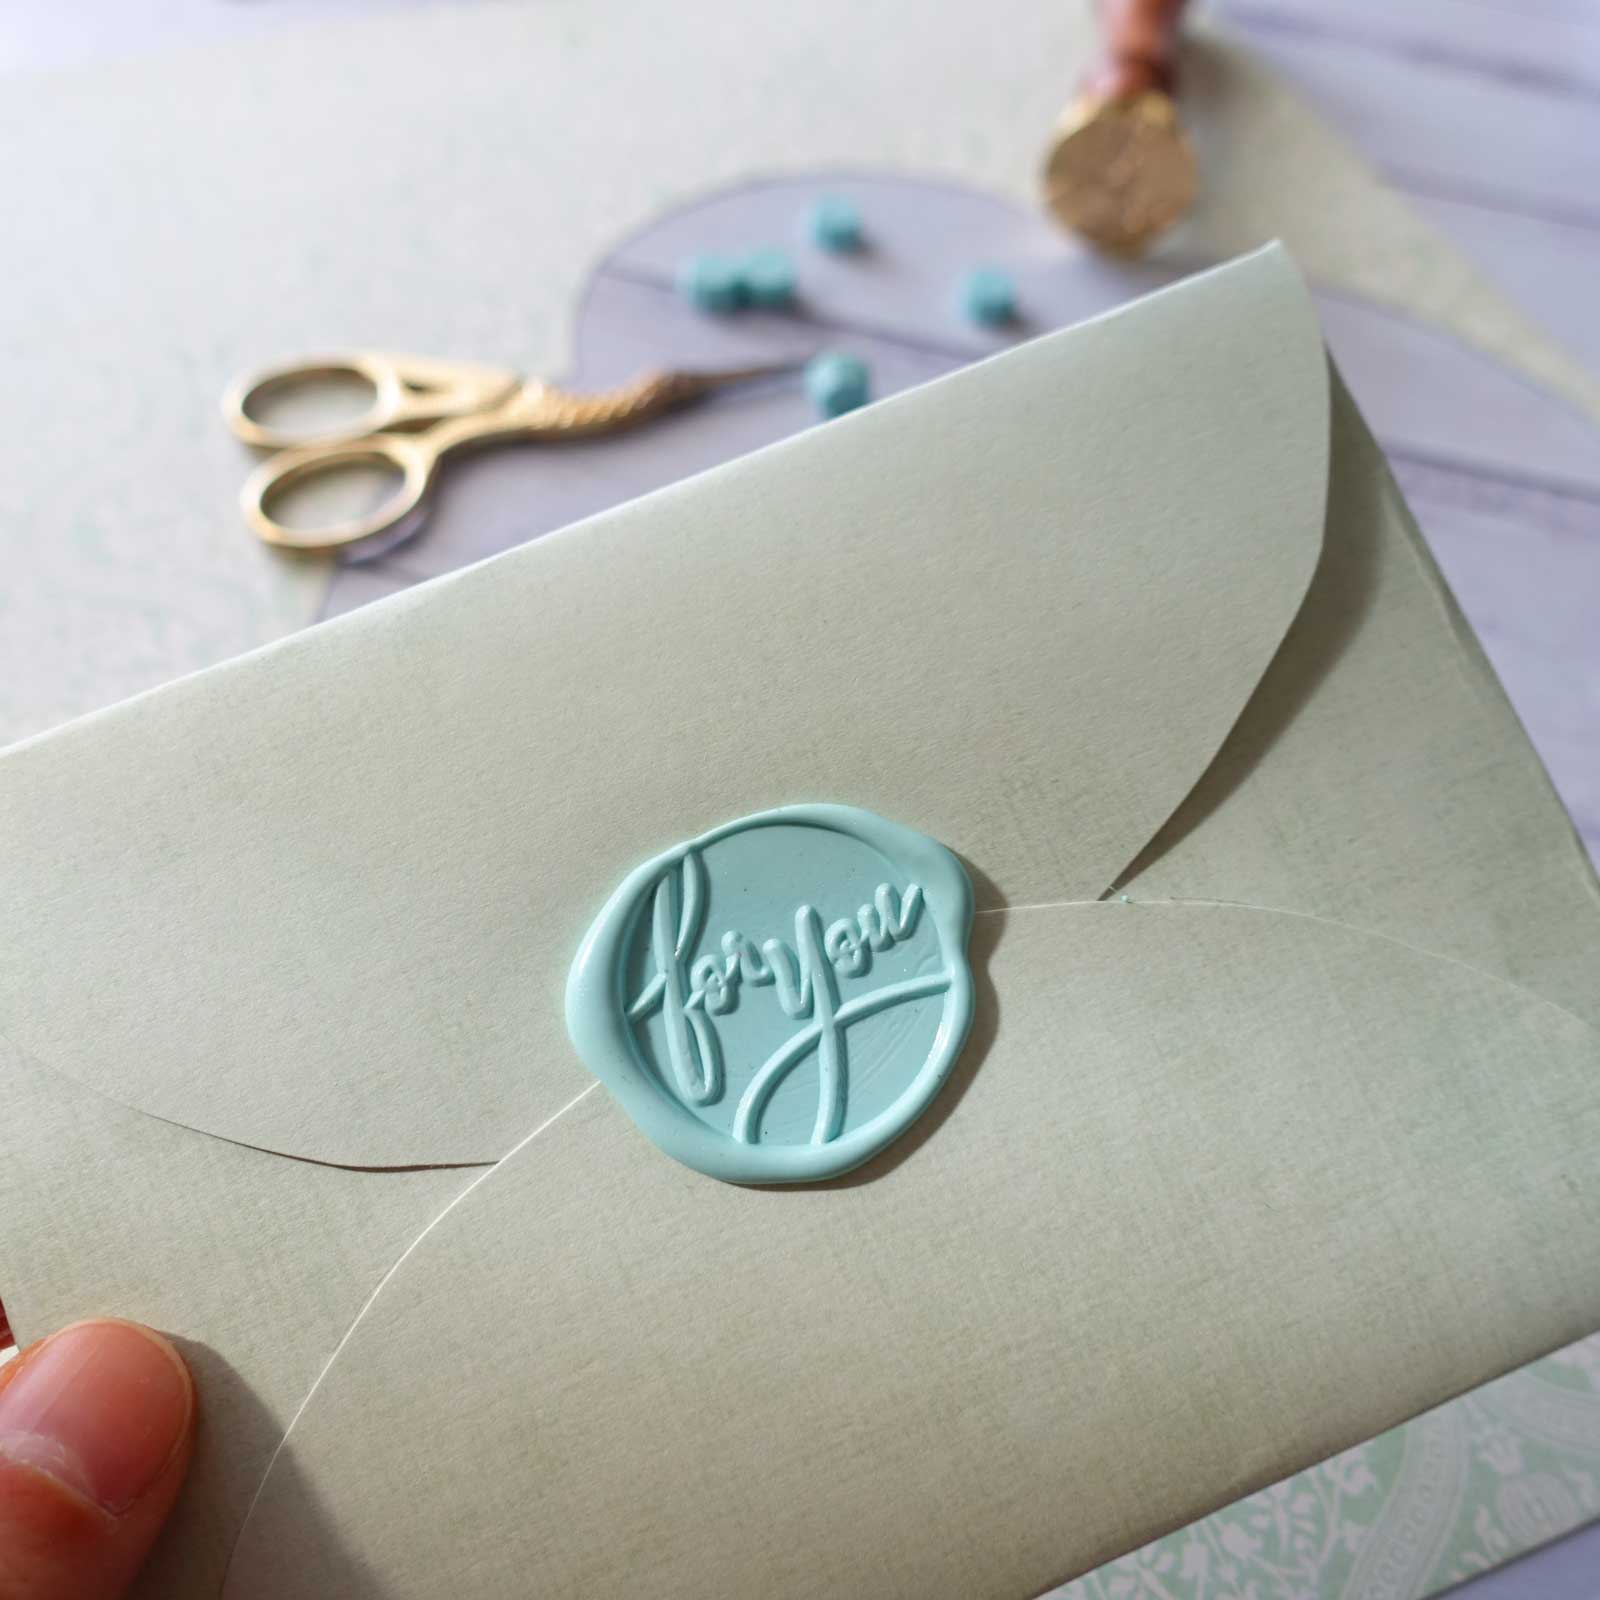 Free download print at home envelope template with round curved flaps and mint for you wax seal